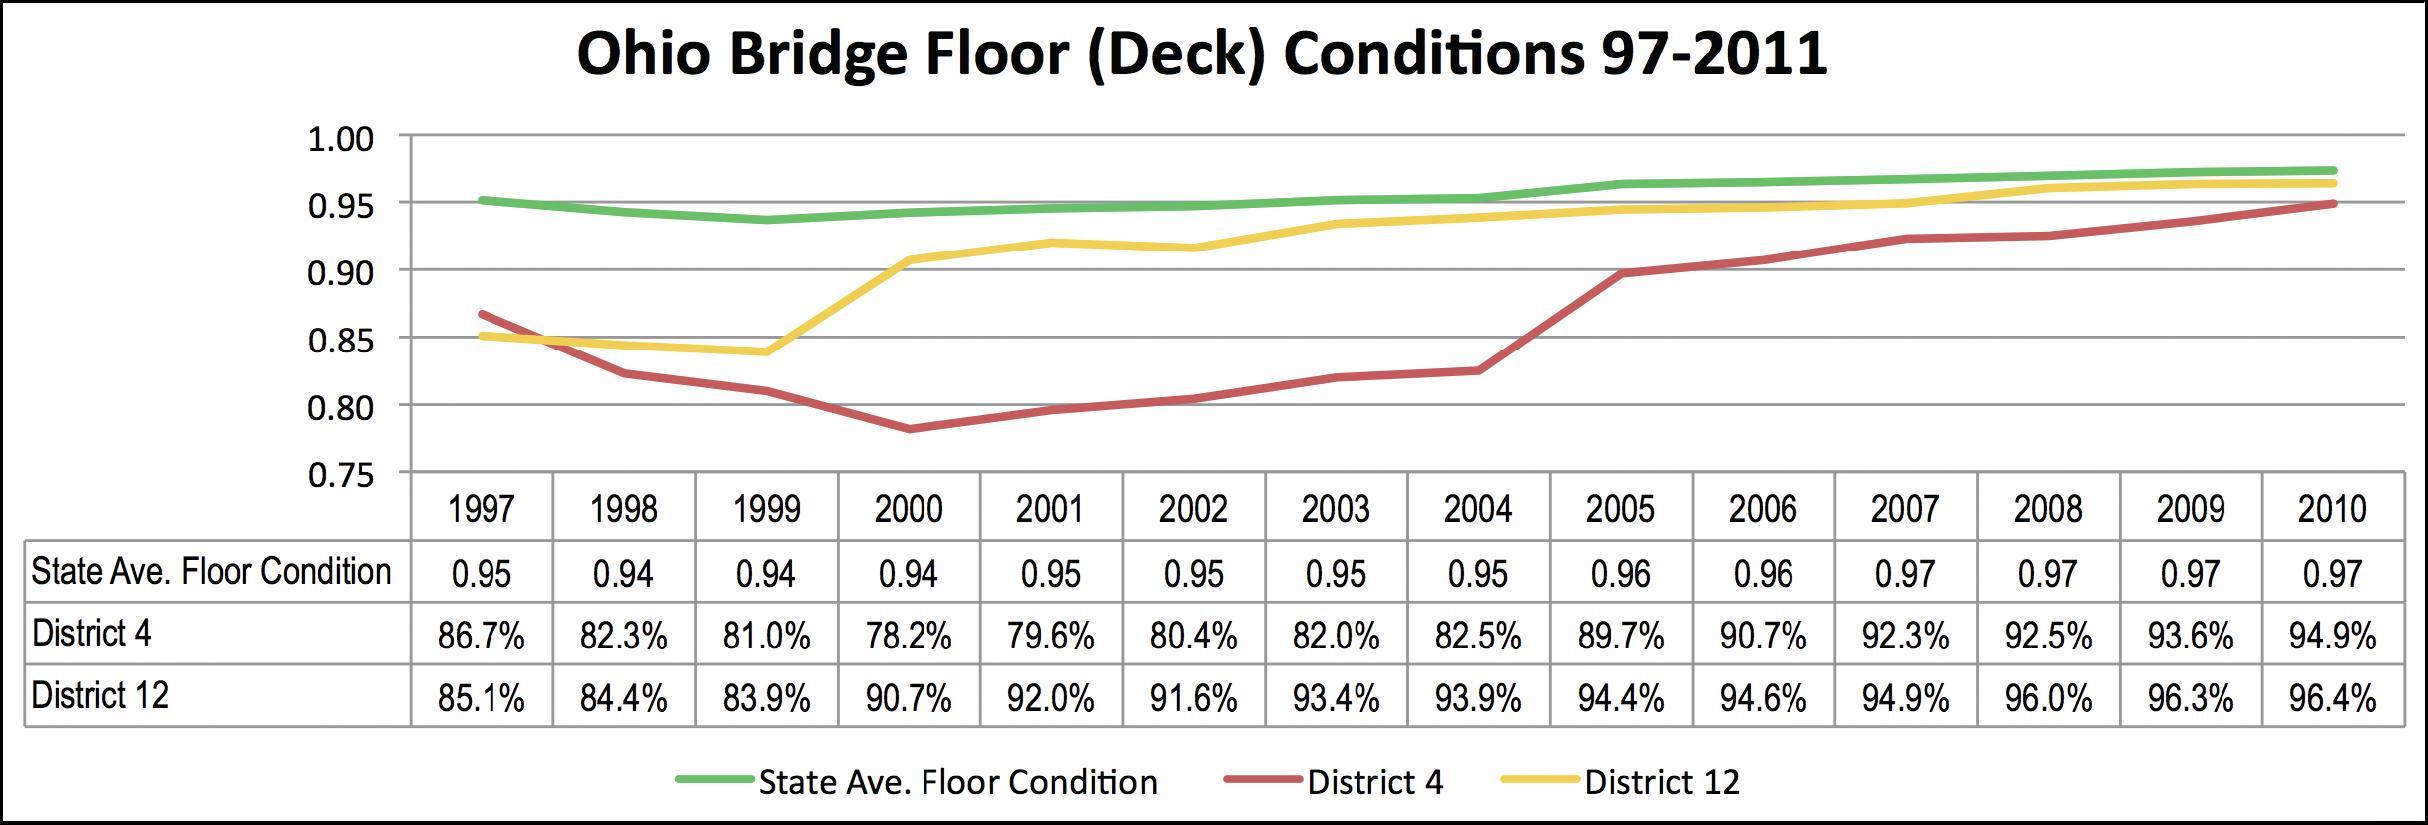 Figure 37 illustrates changes in the bridge deck conditions in Ohio's districts 4 and 12 compared to the statewide average for deck conditions. The chart depicts the period from 1997 to 2010.  It illustrates that although statewide conditions were generally meeting goal throughout the period and that those conditions generally improved over the time period, the bridges in District 4 had substantially deteriorated between 1997 and 2000.  The chart illustrates that although statewide averages can meet target, within the average statewide conditions can be regions with below-average conditions.  The chart illustrates that District 4 rose from a low of having only 78 point 2 percent of bridges meeting goal to have nearly 95 percent meeting goal in 2010 and achieving its target. Likewise, District 12 reached a low point in conditions in 1998 when 83 point 9 percent of its bridge floor area met goal to 2010 when 96 point 4 percent met goal. 